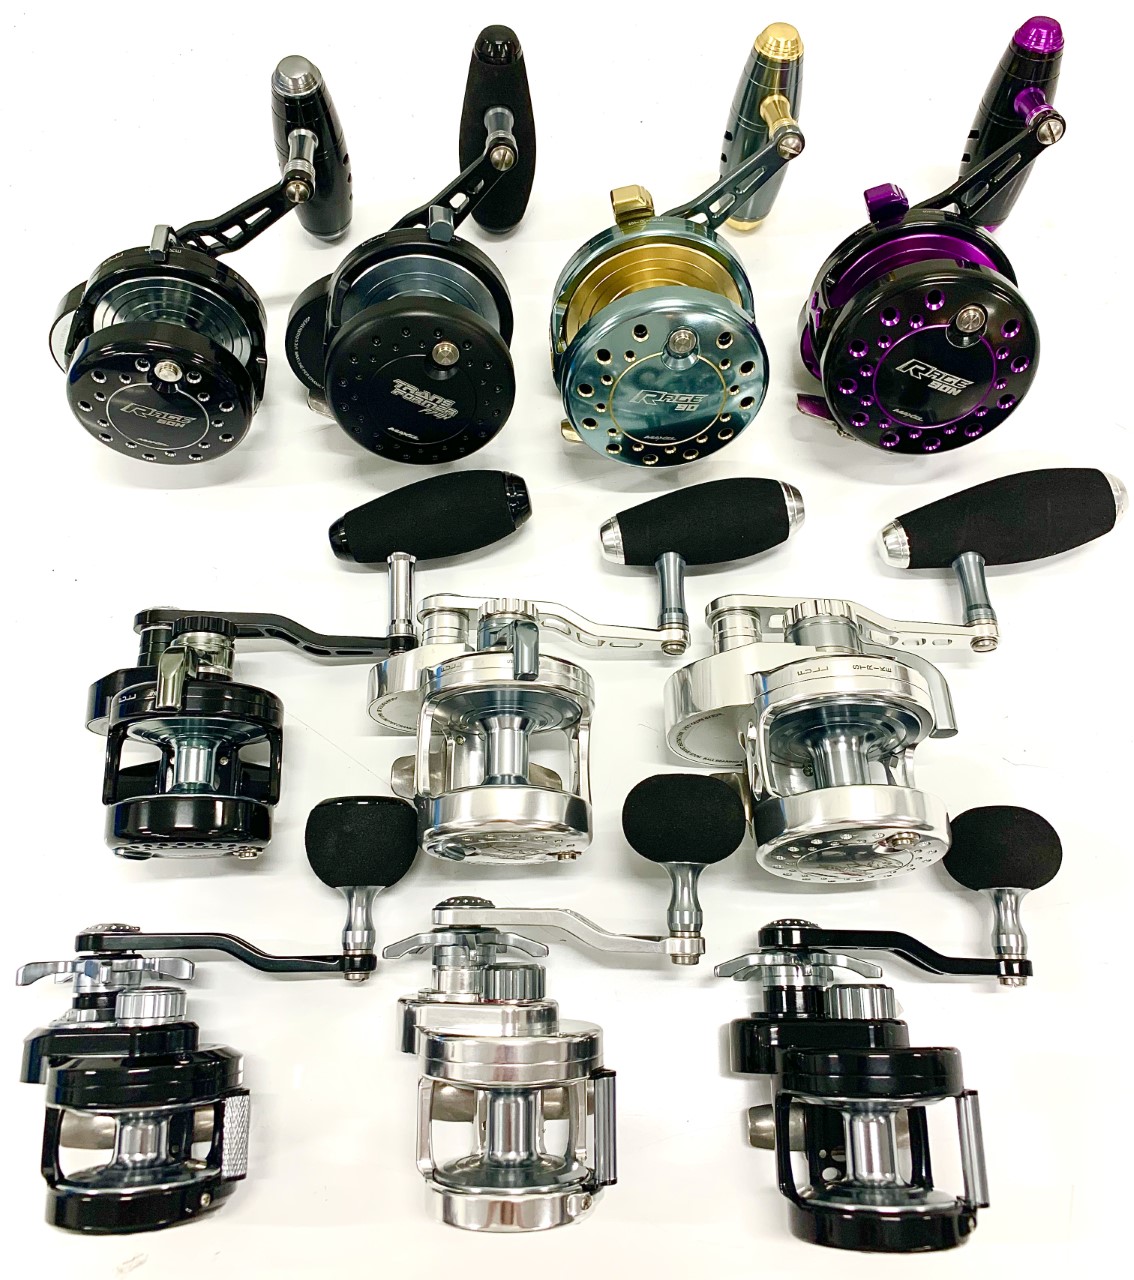 http://fishwrecked.com/files/Southside%20boating%20and%20fishing/MAXEL%20reels.jpg